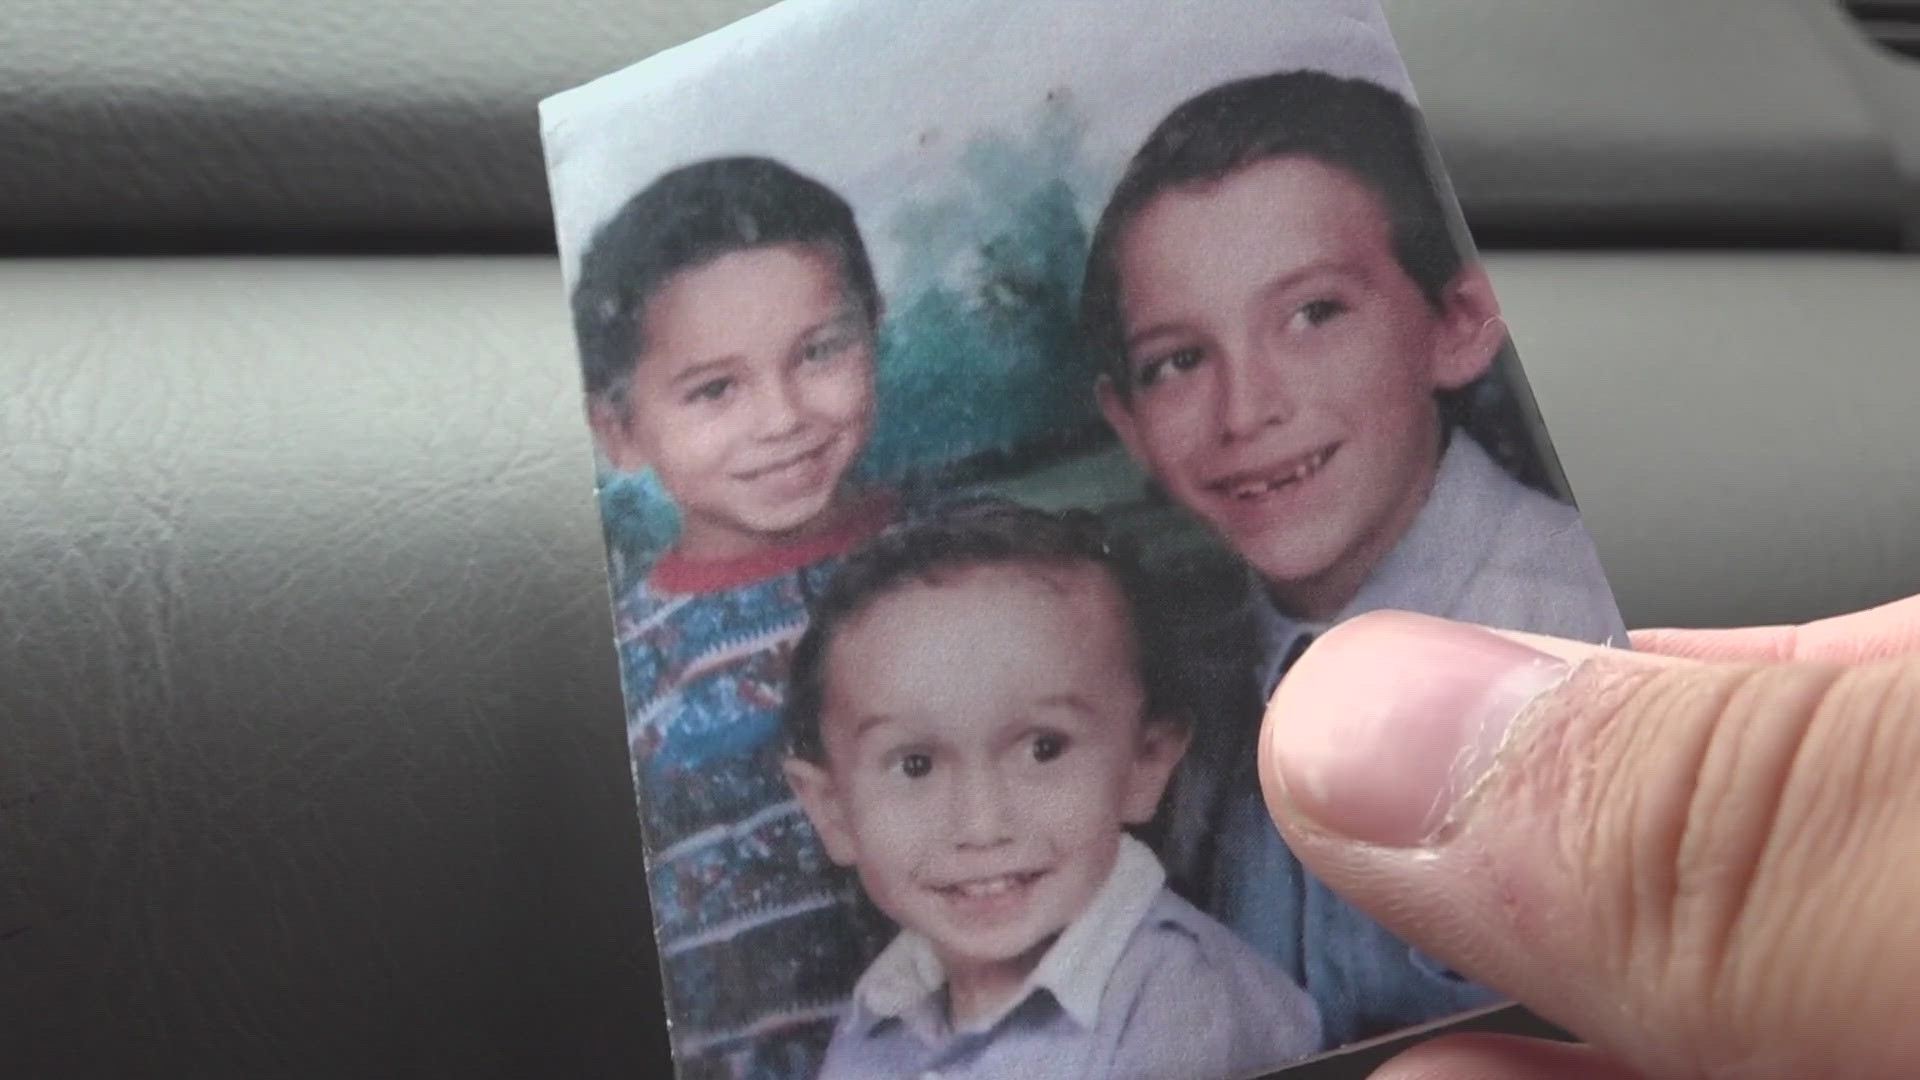 In 2013, Daniel Flores was found dead in a car in Big Spring, Texas, holding a picture of the ones he loved.